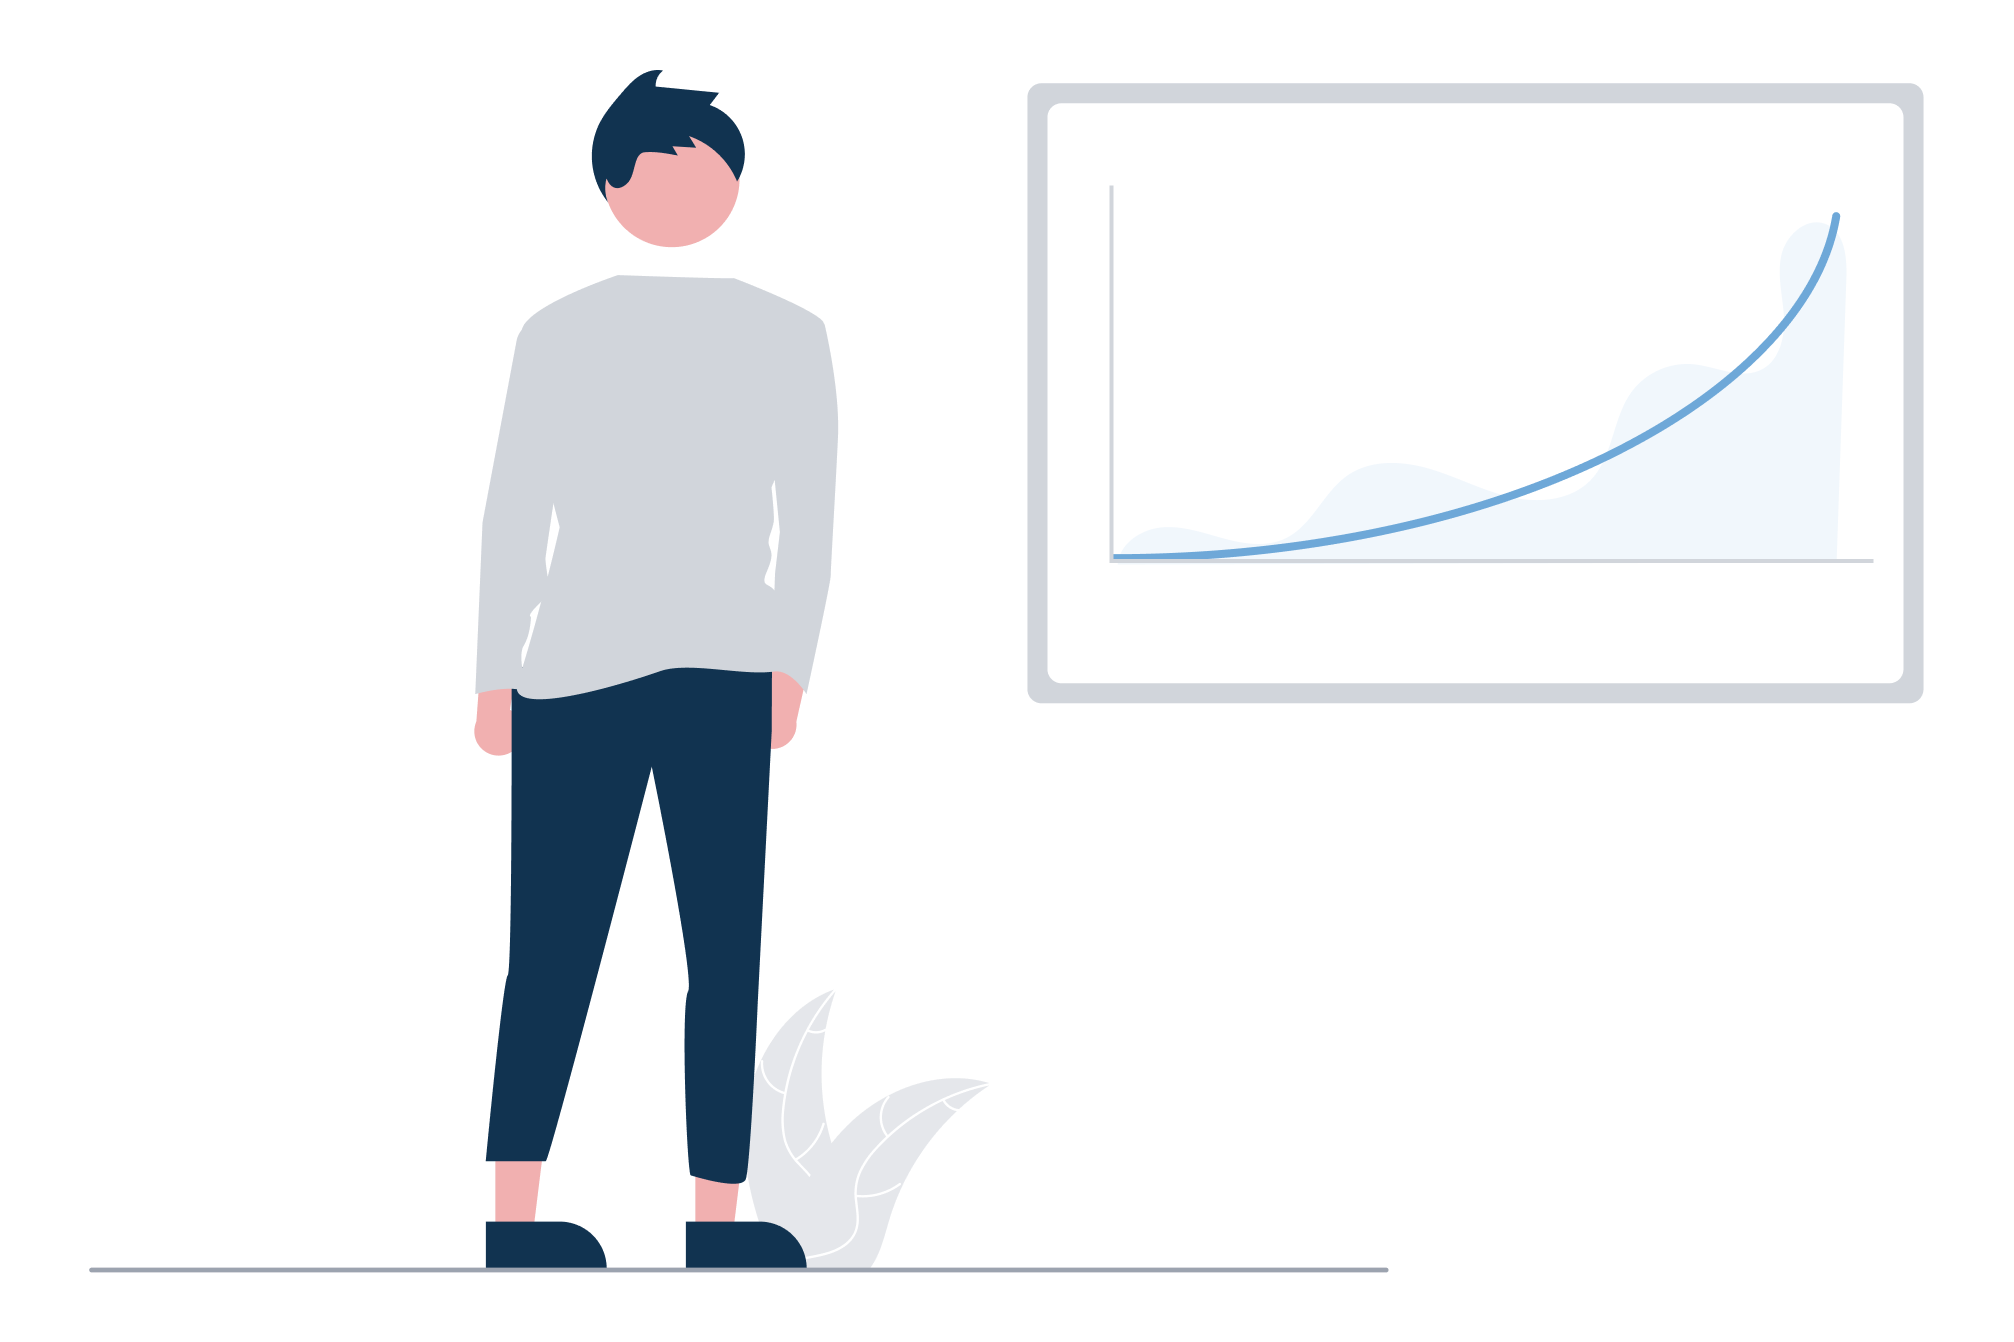 Illustration of a figure standing next to a graph showing exponential growth